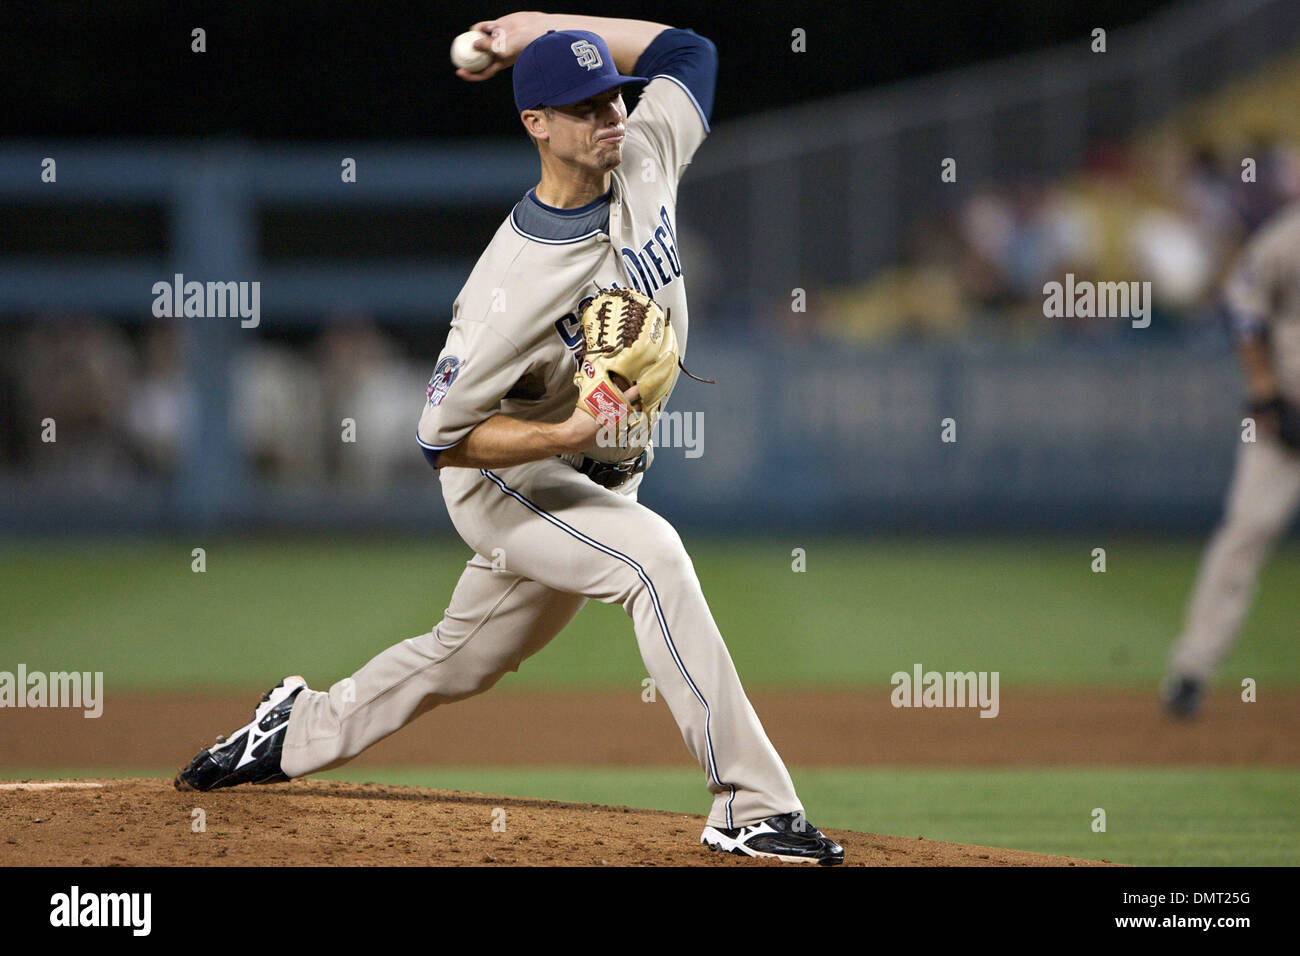 Game action between the San Diego Padres and Los Angeles Dodgers at Dodger Stadium.  Wade LeBlanc makes a pitch against the Dodgers in the bottom of the third inning. (Credit Image: © Tony Leon/Southcreek Global/ZUMApress.com) Stock Photo